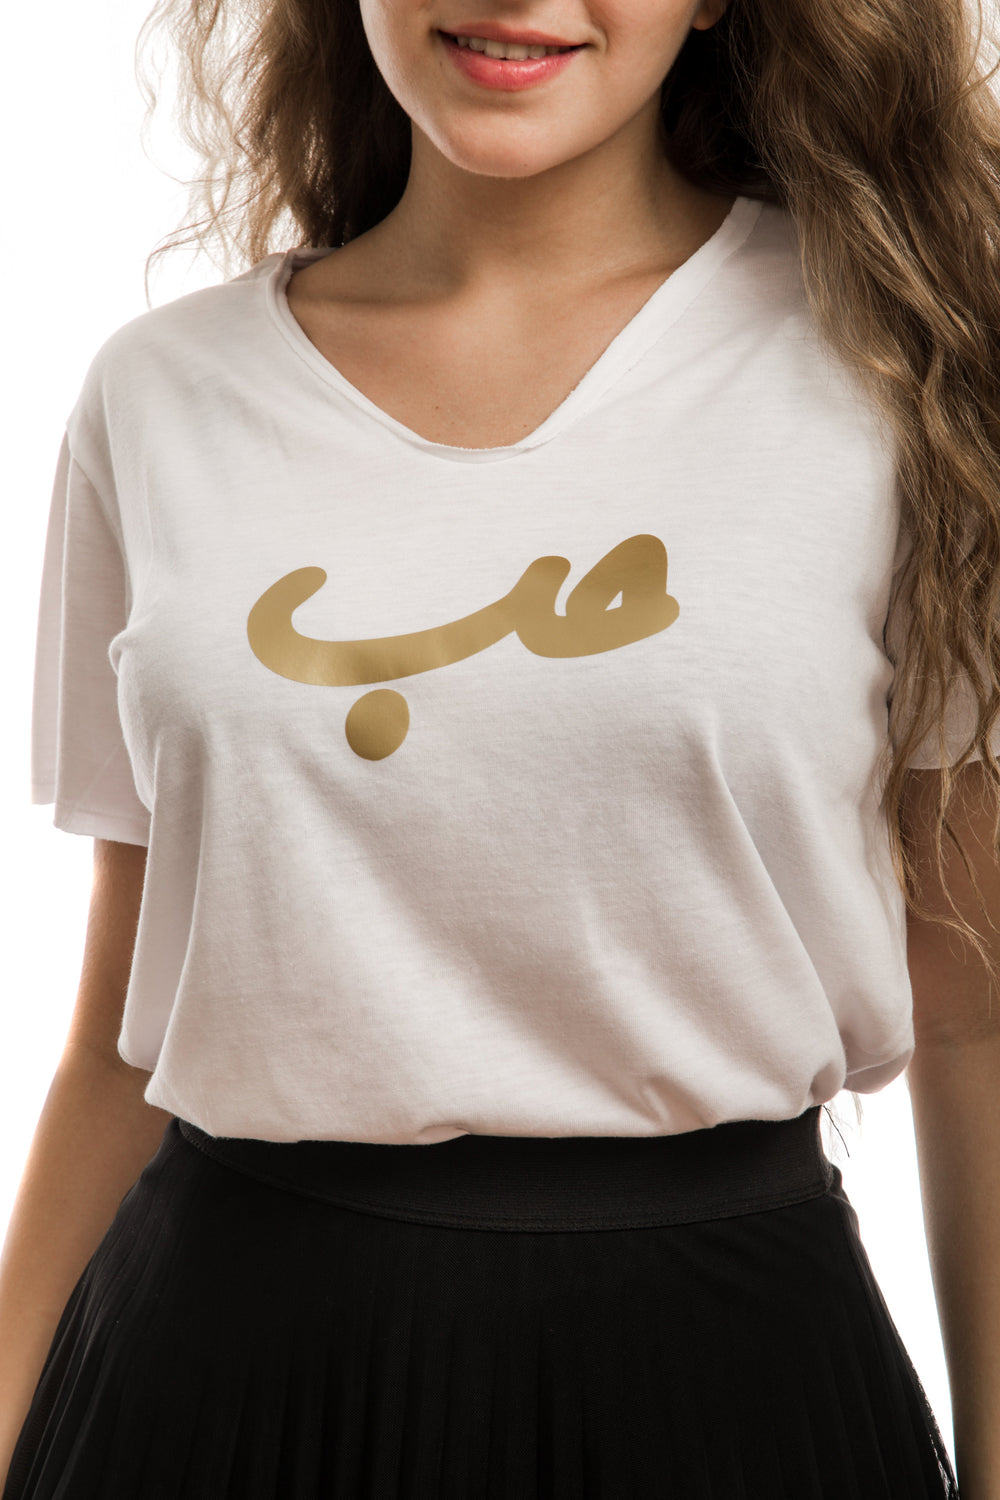 young adult female wearing white t-shirt with hobb written in arabic حب and in gold in the center of the t-shirt